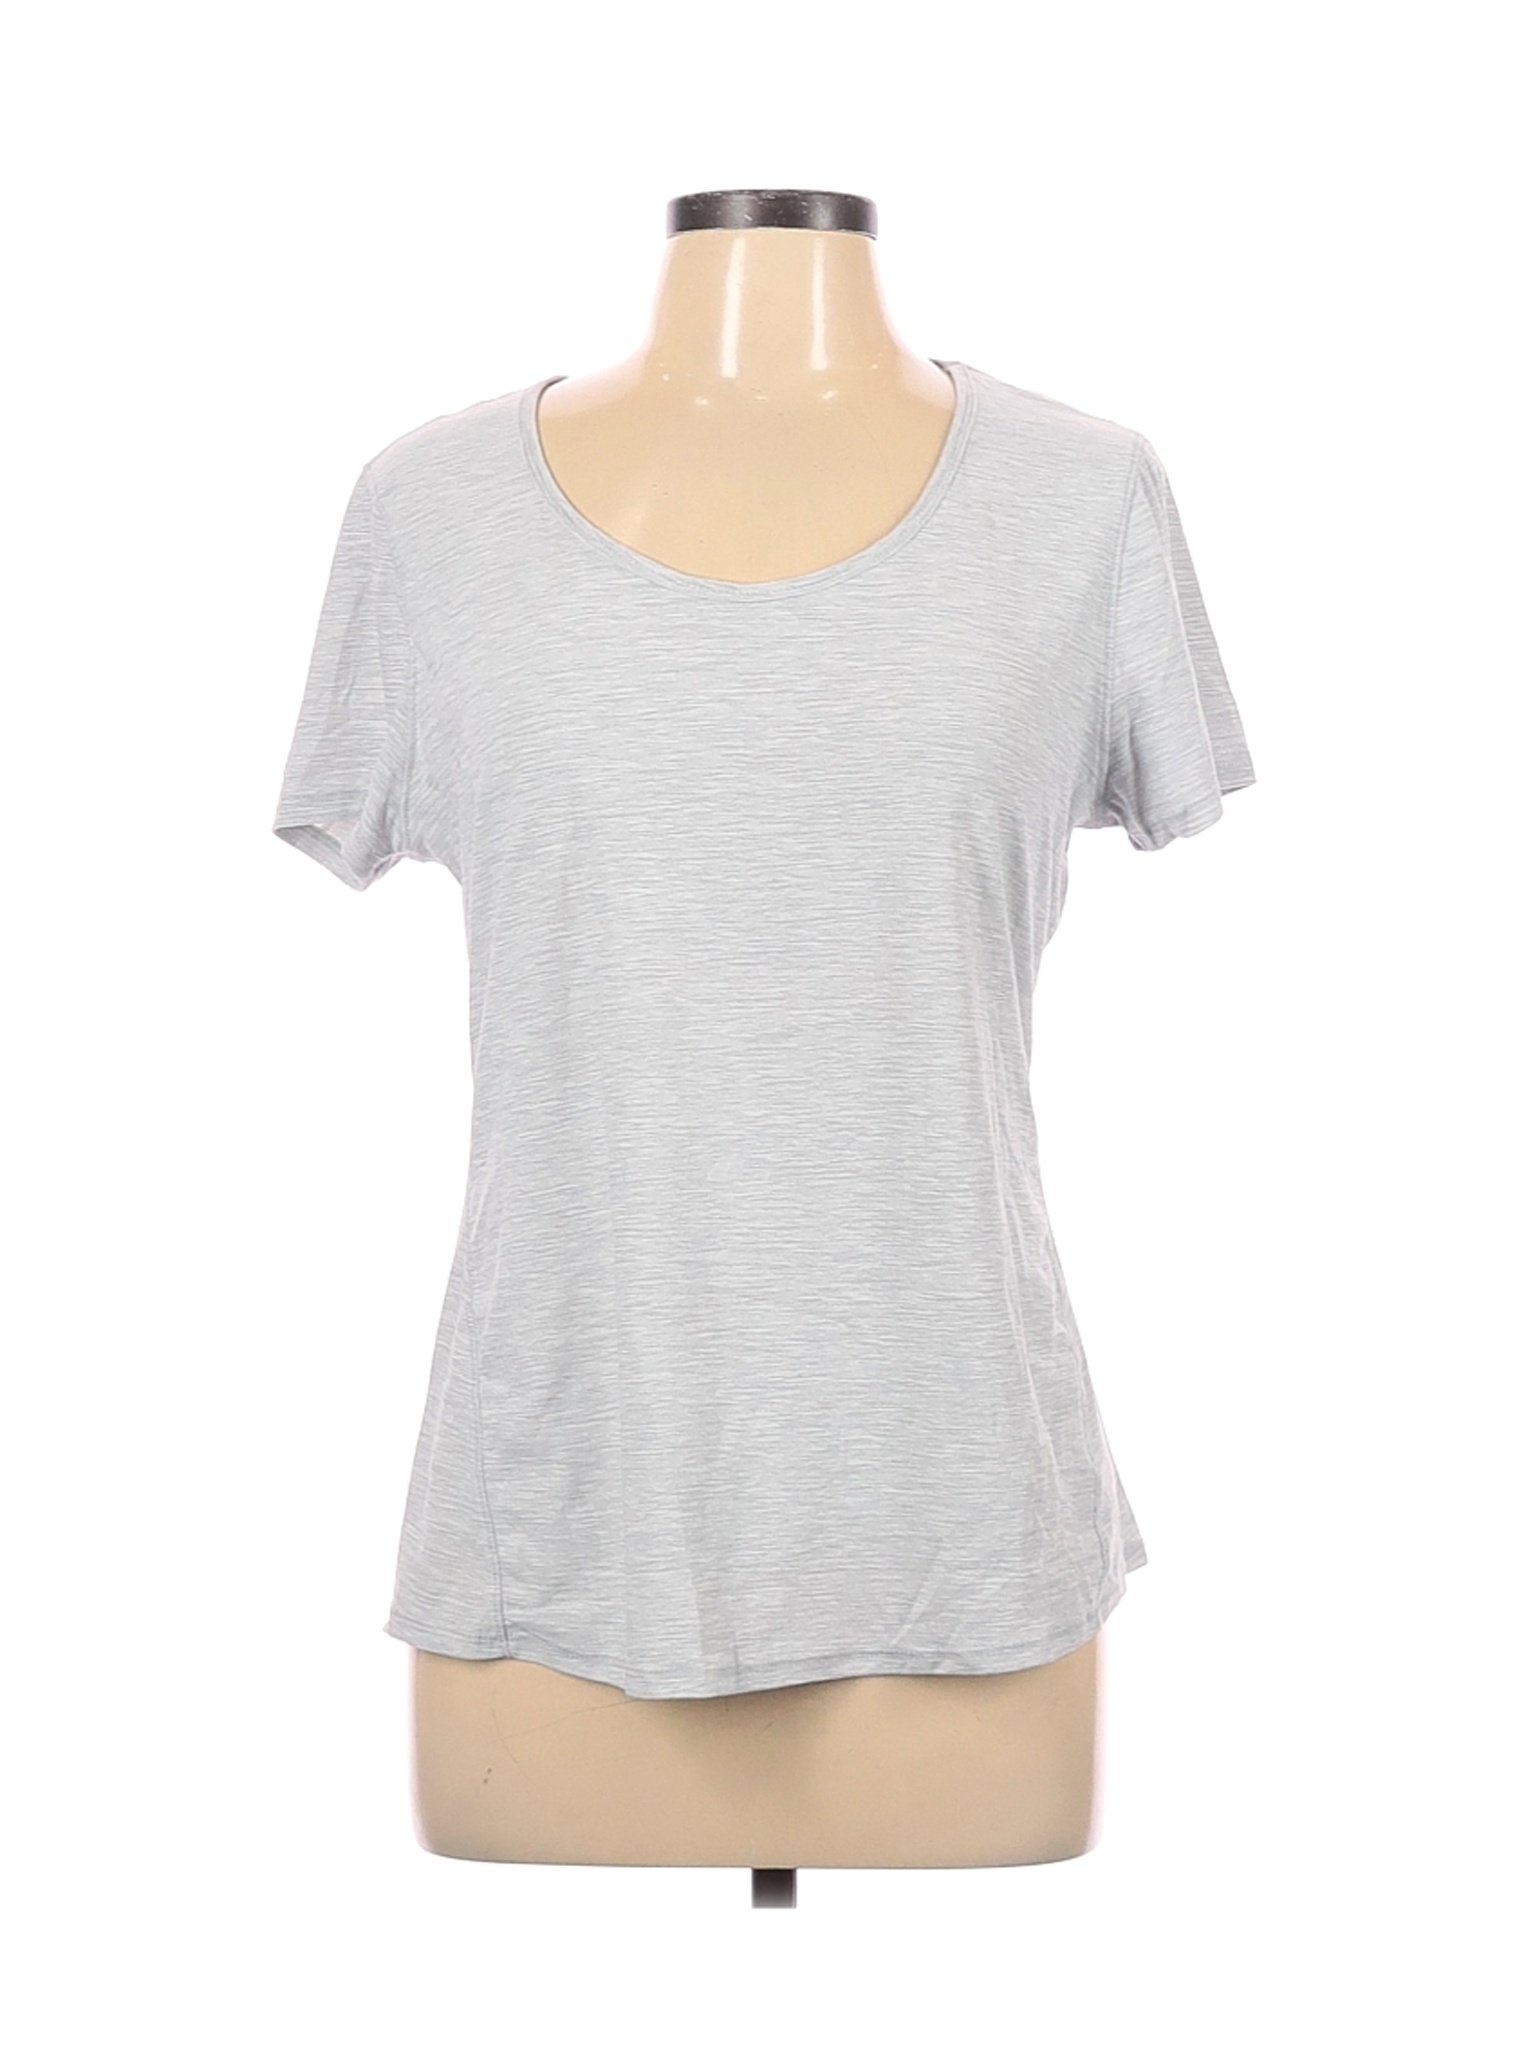 Active by Old Navy Women Gray Active T-Shirt L | eBay